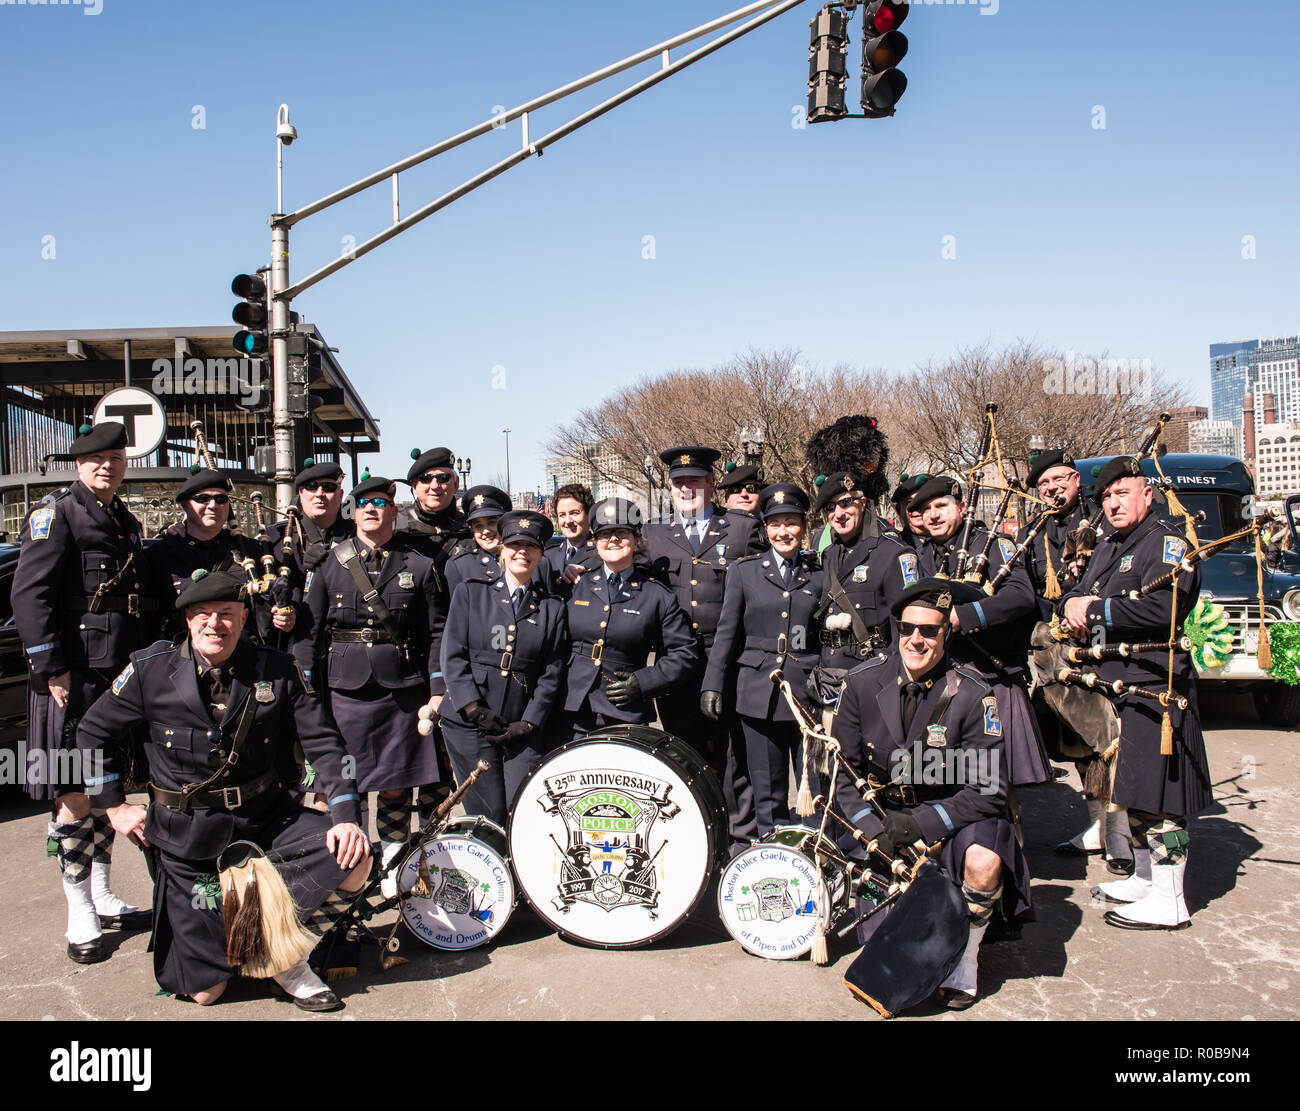 Members of the Boston Police Gaelic Column of Pipes and Drums posing with members of the An Garda Síochána, the police service of Ireland. Stock Photo